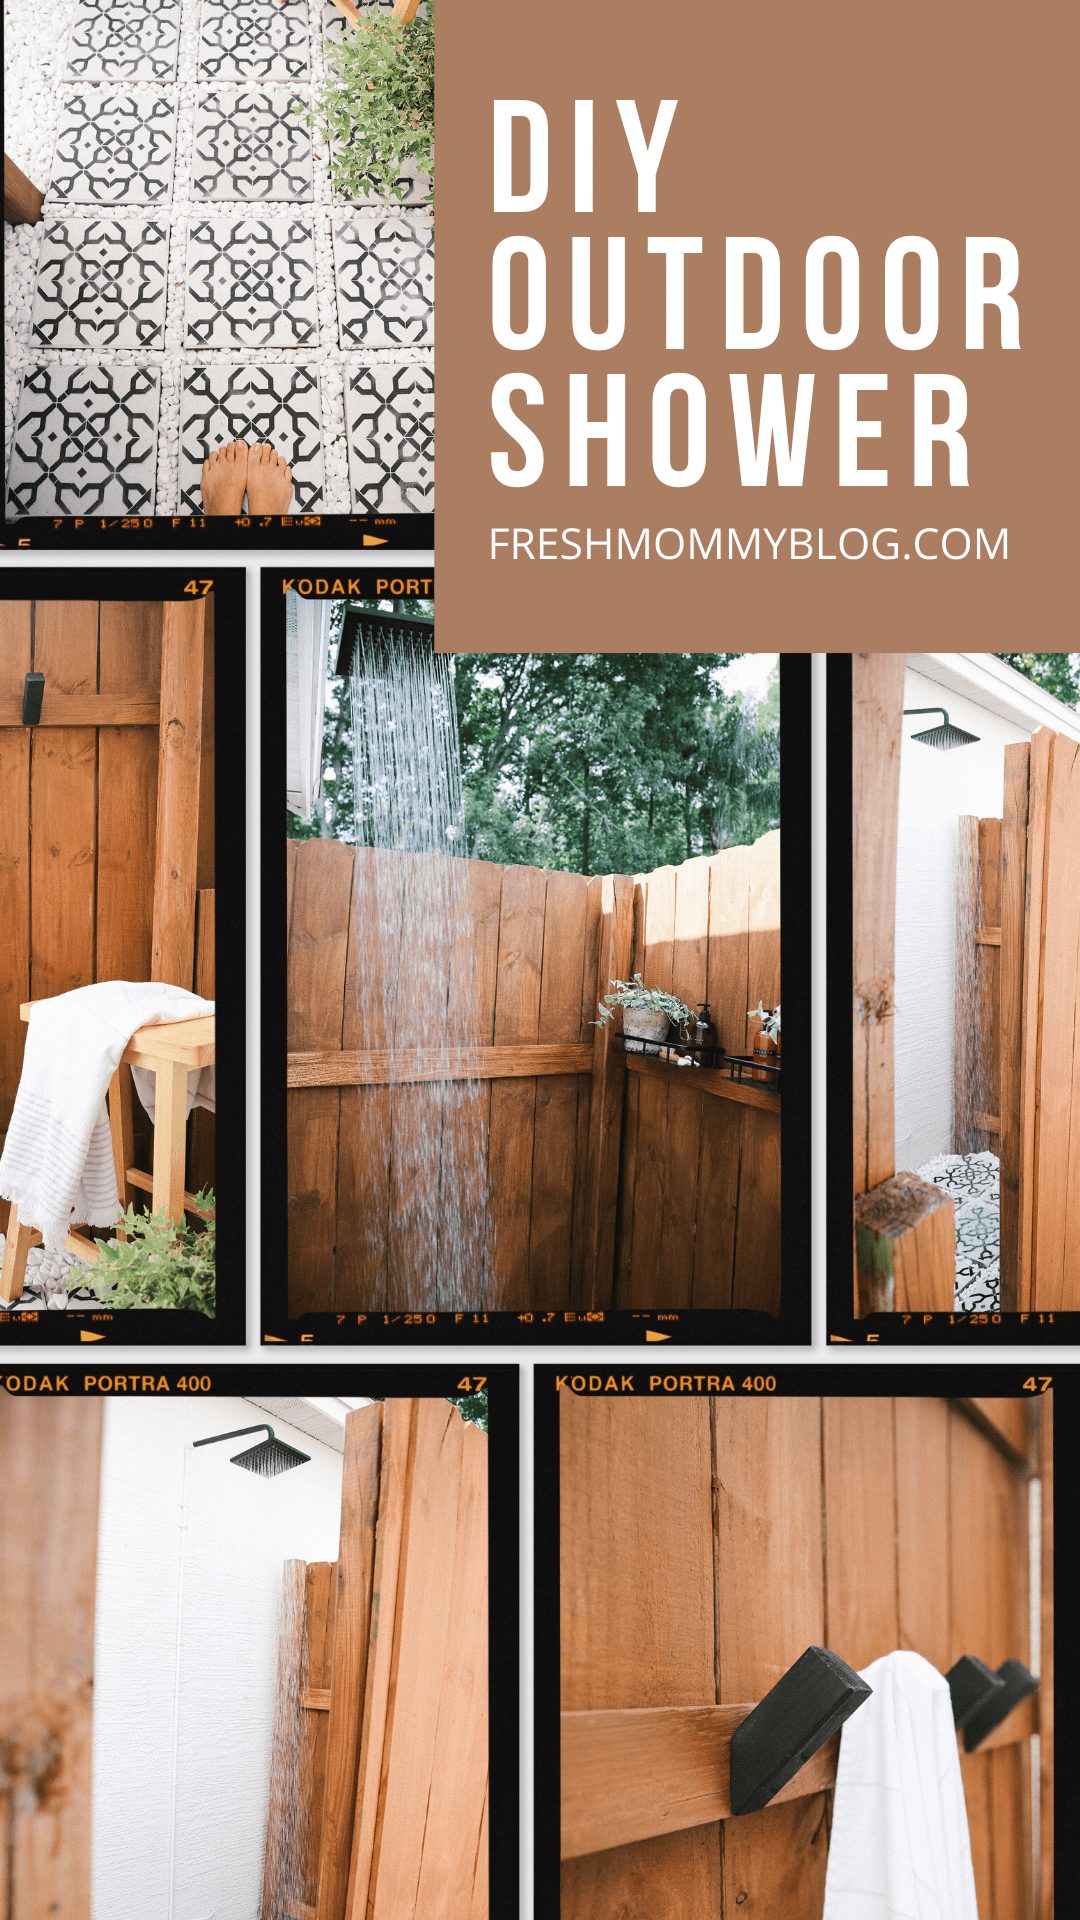 DIY Outdoor Shower Ideas on a Budget for the Ultimate Backyard Oasis | DIY Outdoor Shower by popular Florida DIY blog, Fresh Mommy Blog: Pinterest image of a DIY outdoor shower. 